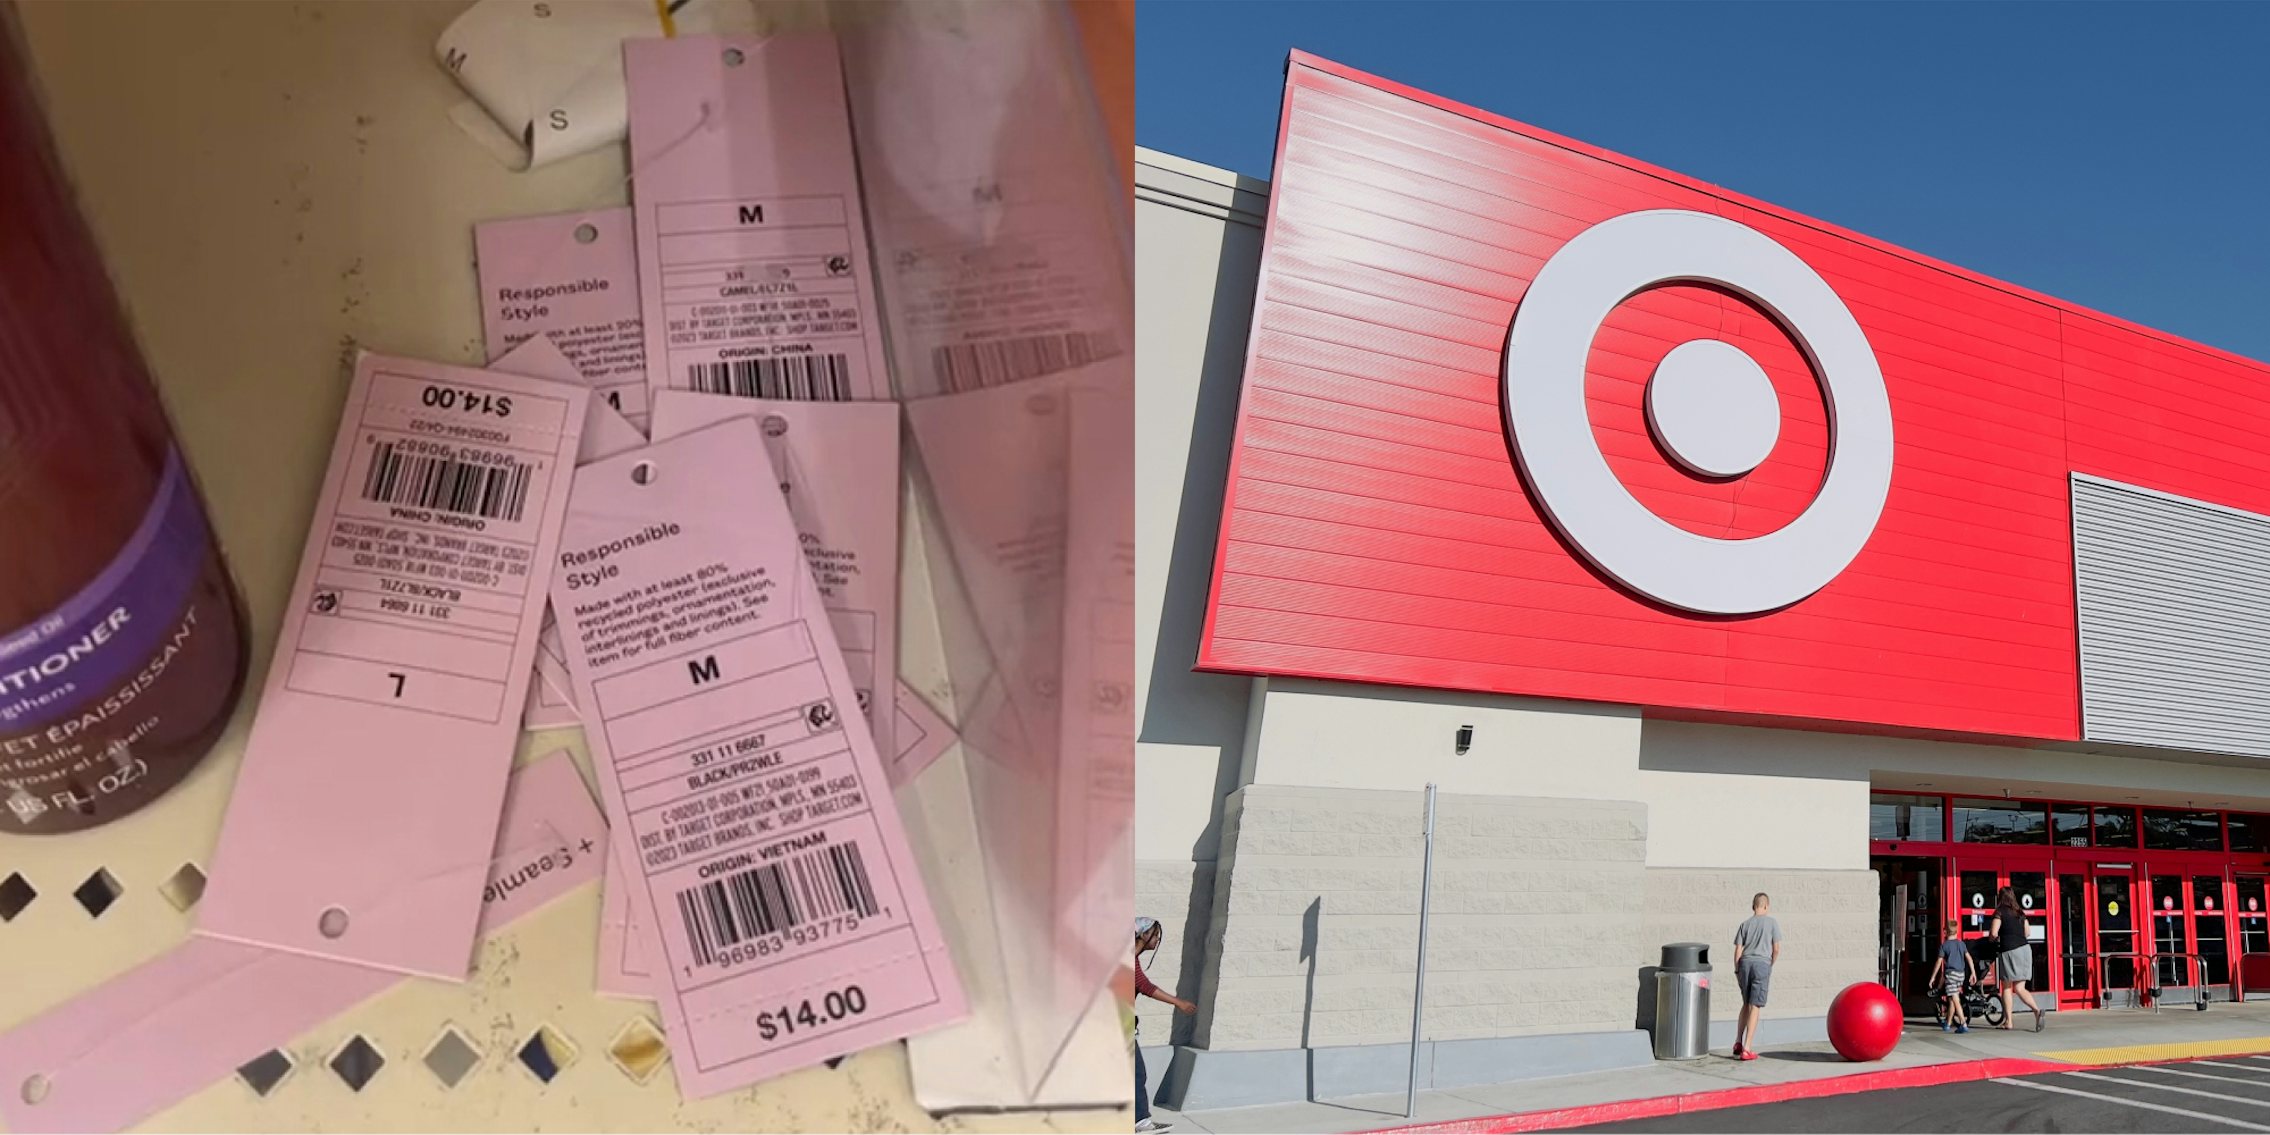 clothing tags removed on Target shelf (l) Target store entrance with sign (r)